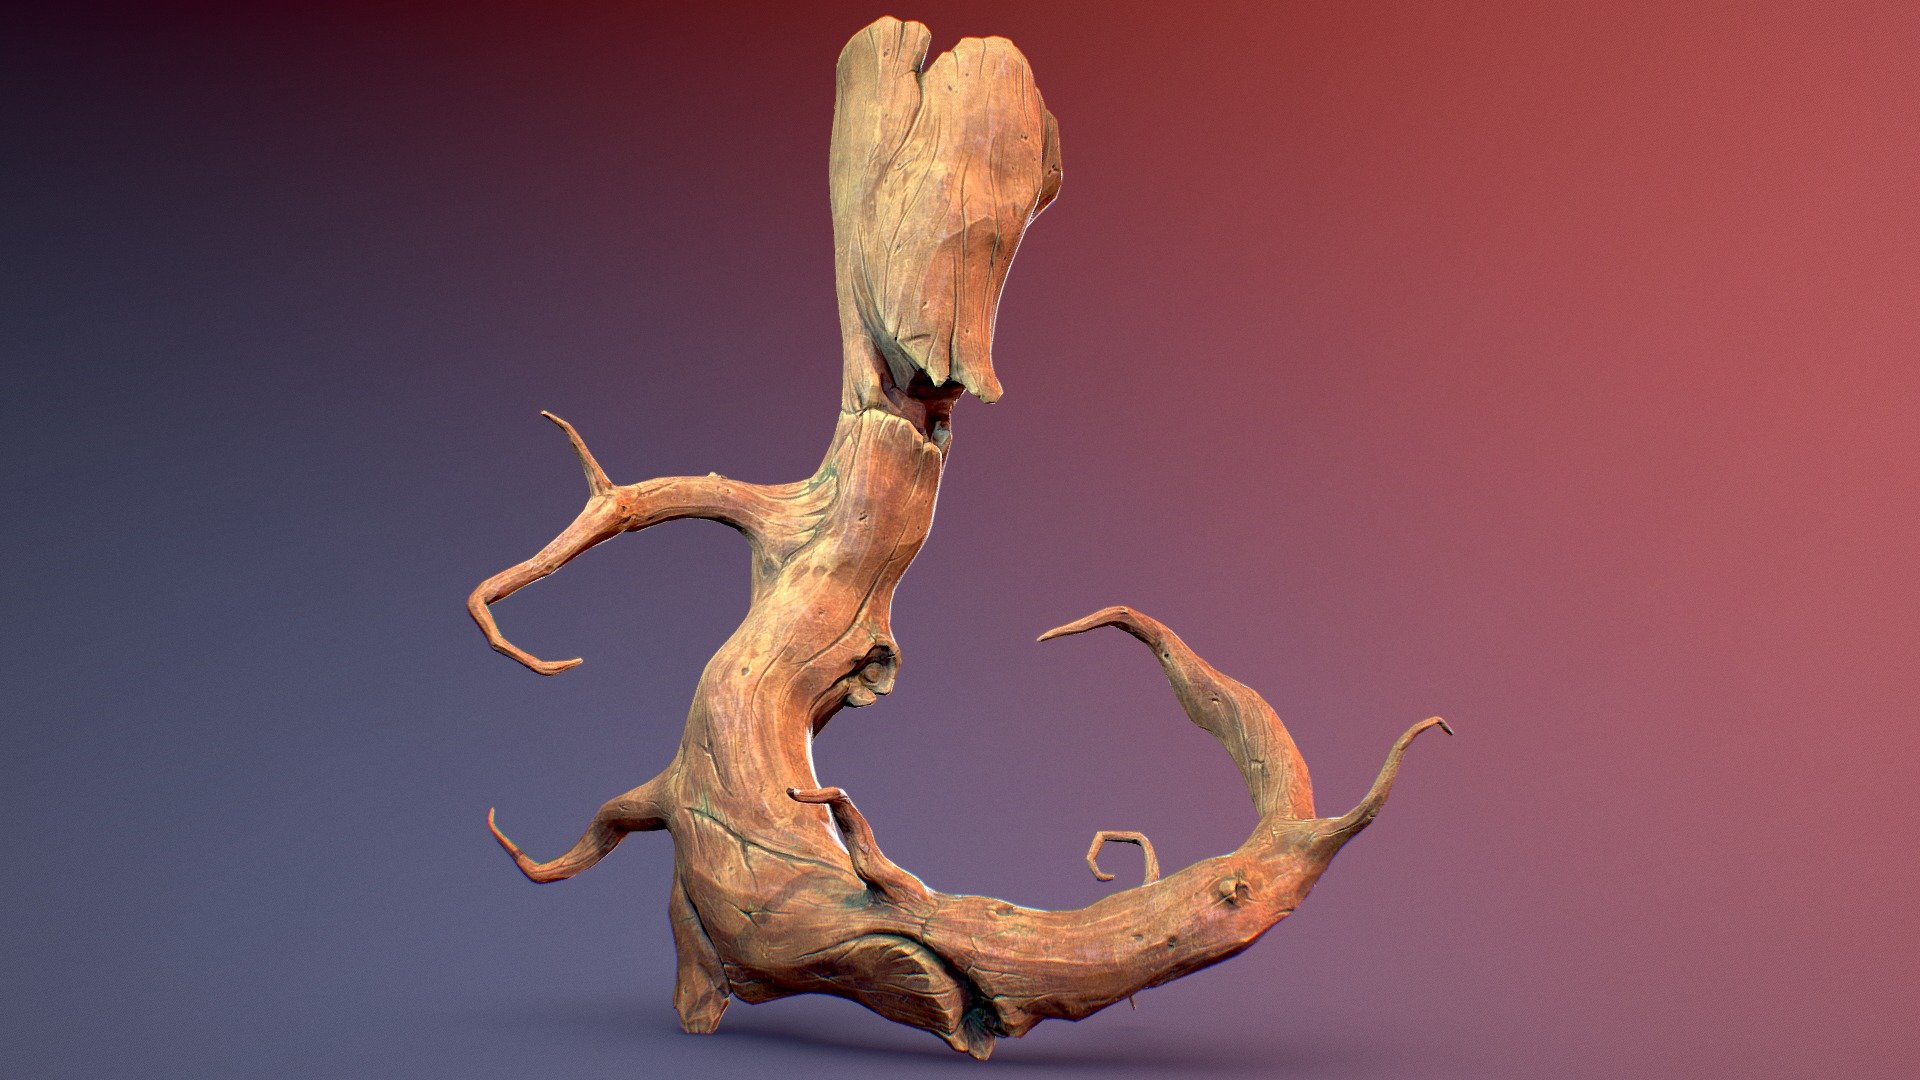 Stylized Tree Monster - LowPoly textured version